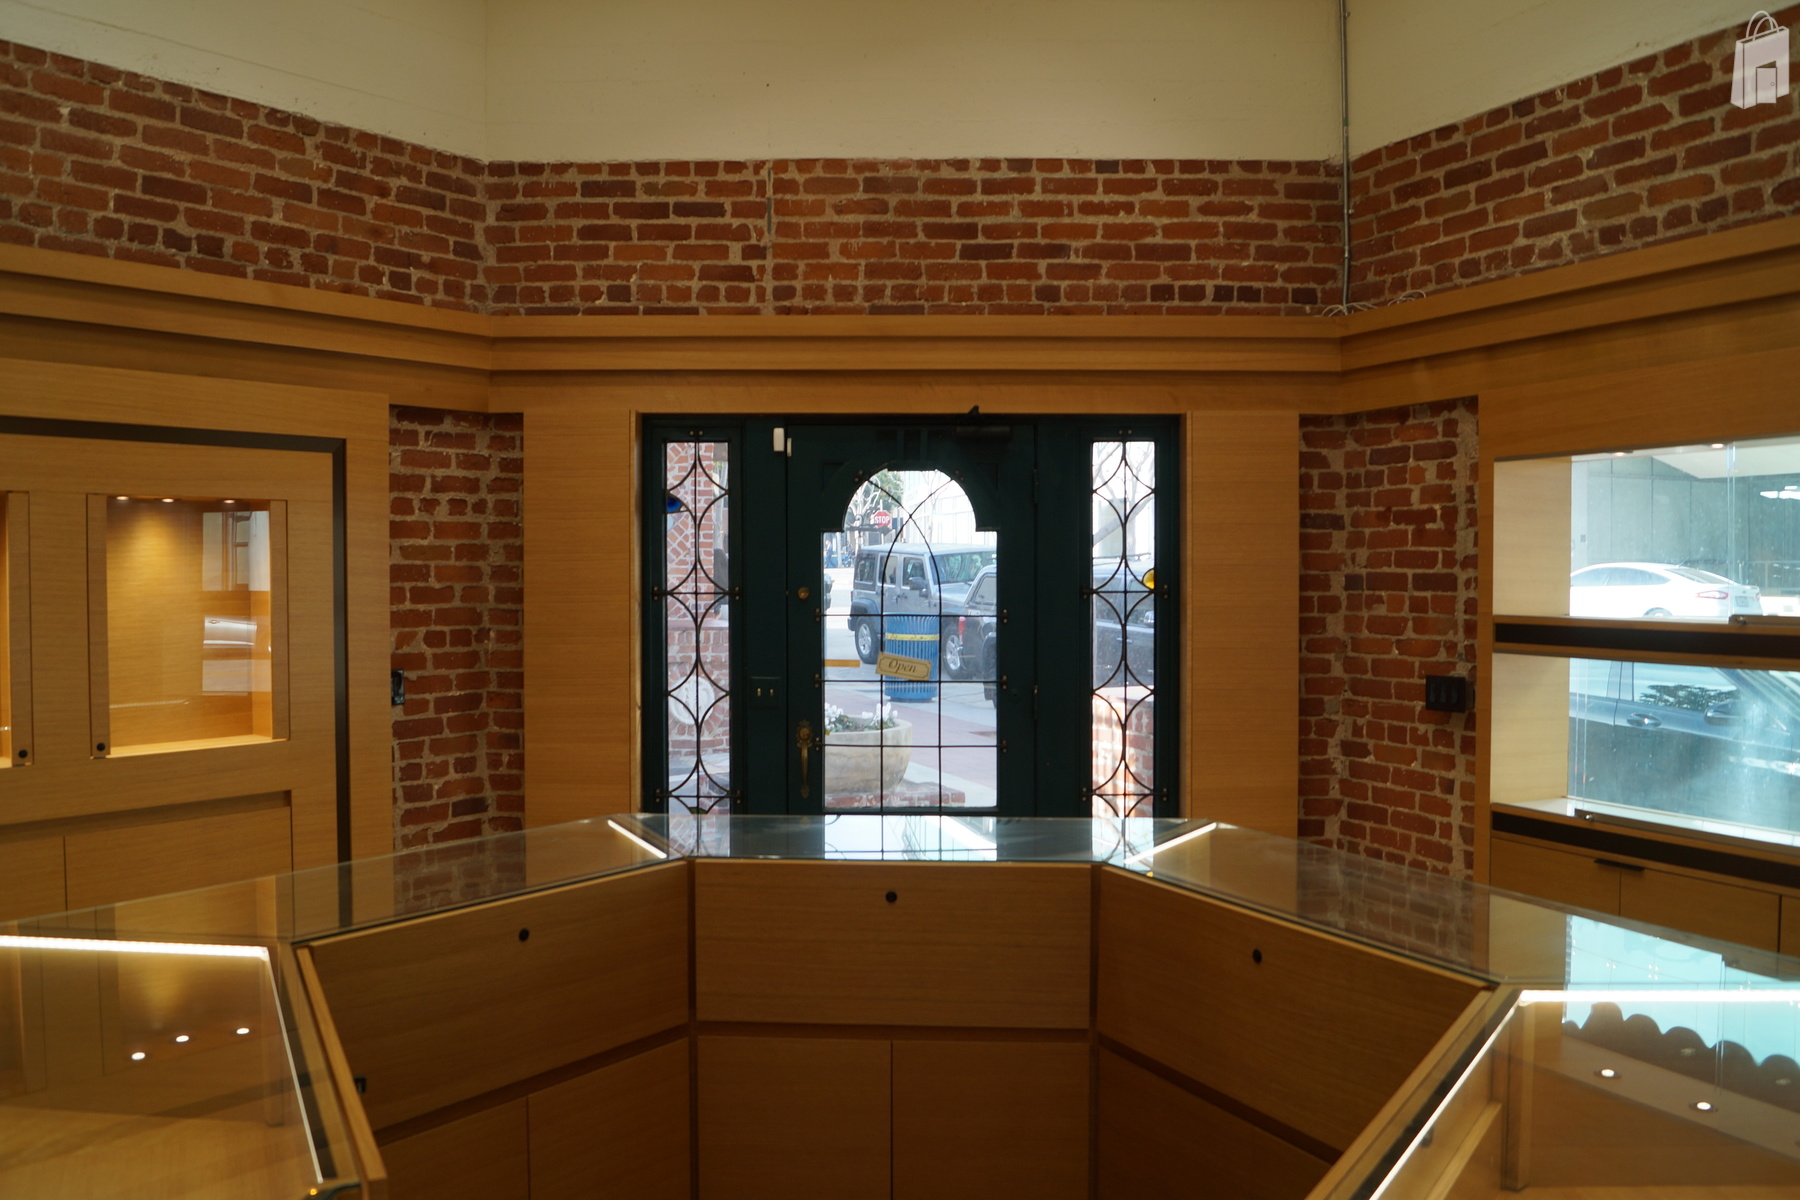 Octogan shaped main retail space with central display and display windows well lit and built into red brick walls.